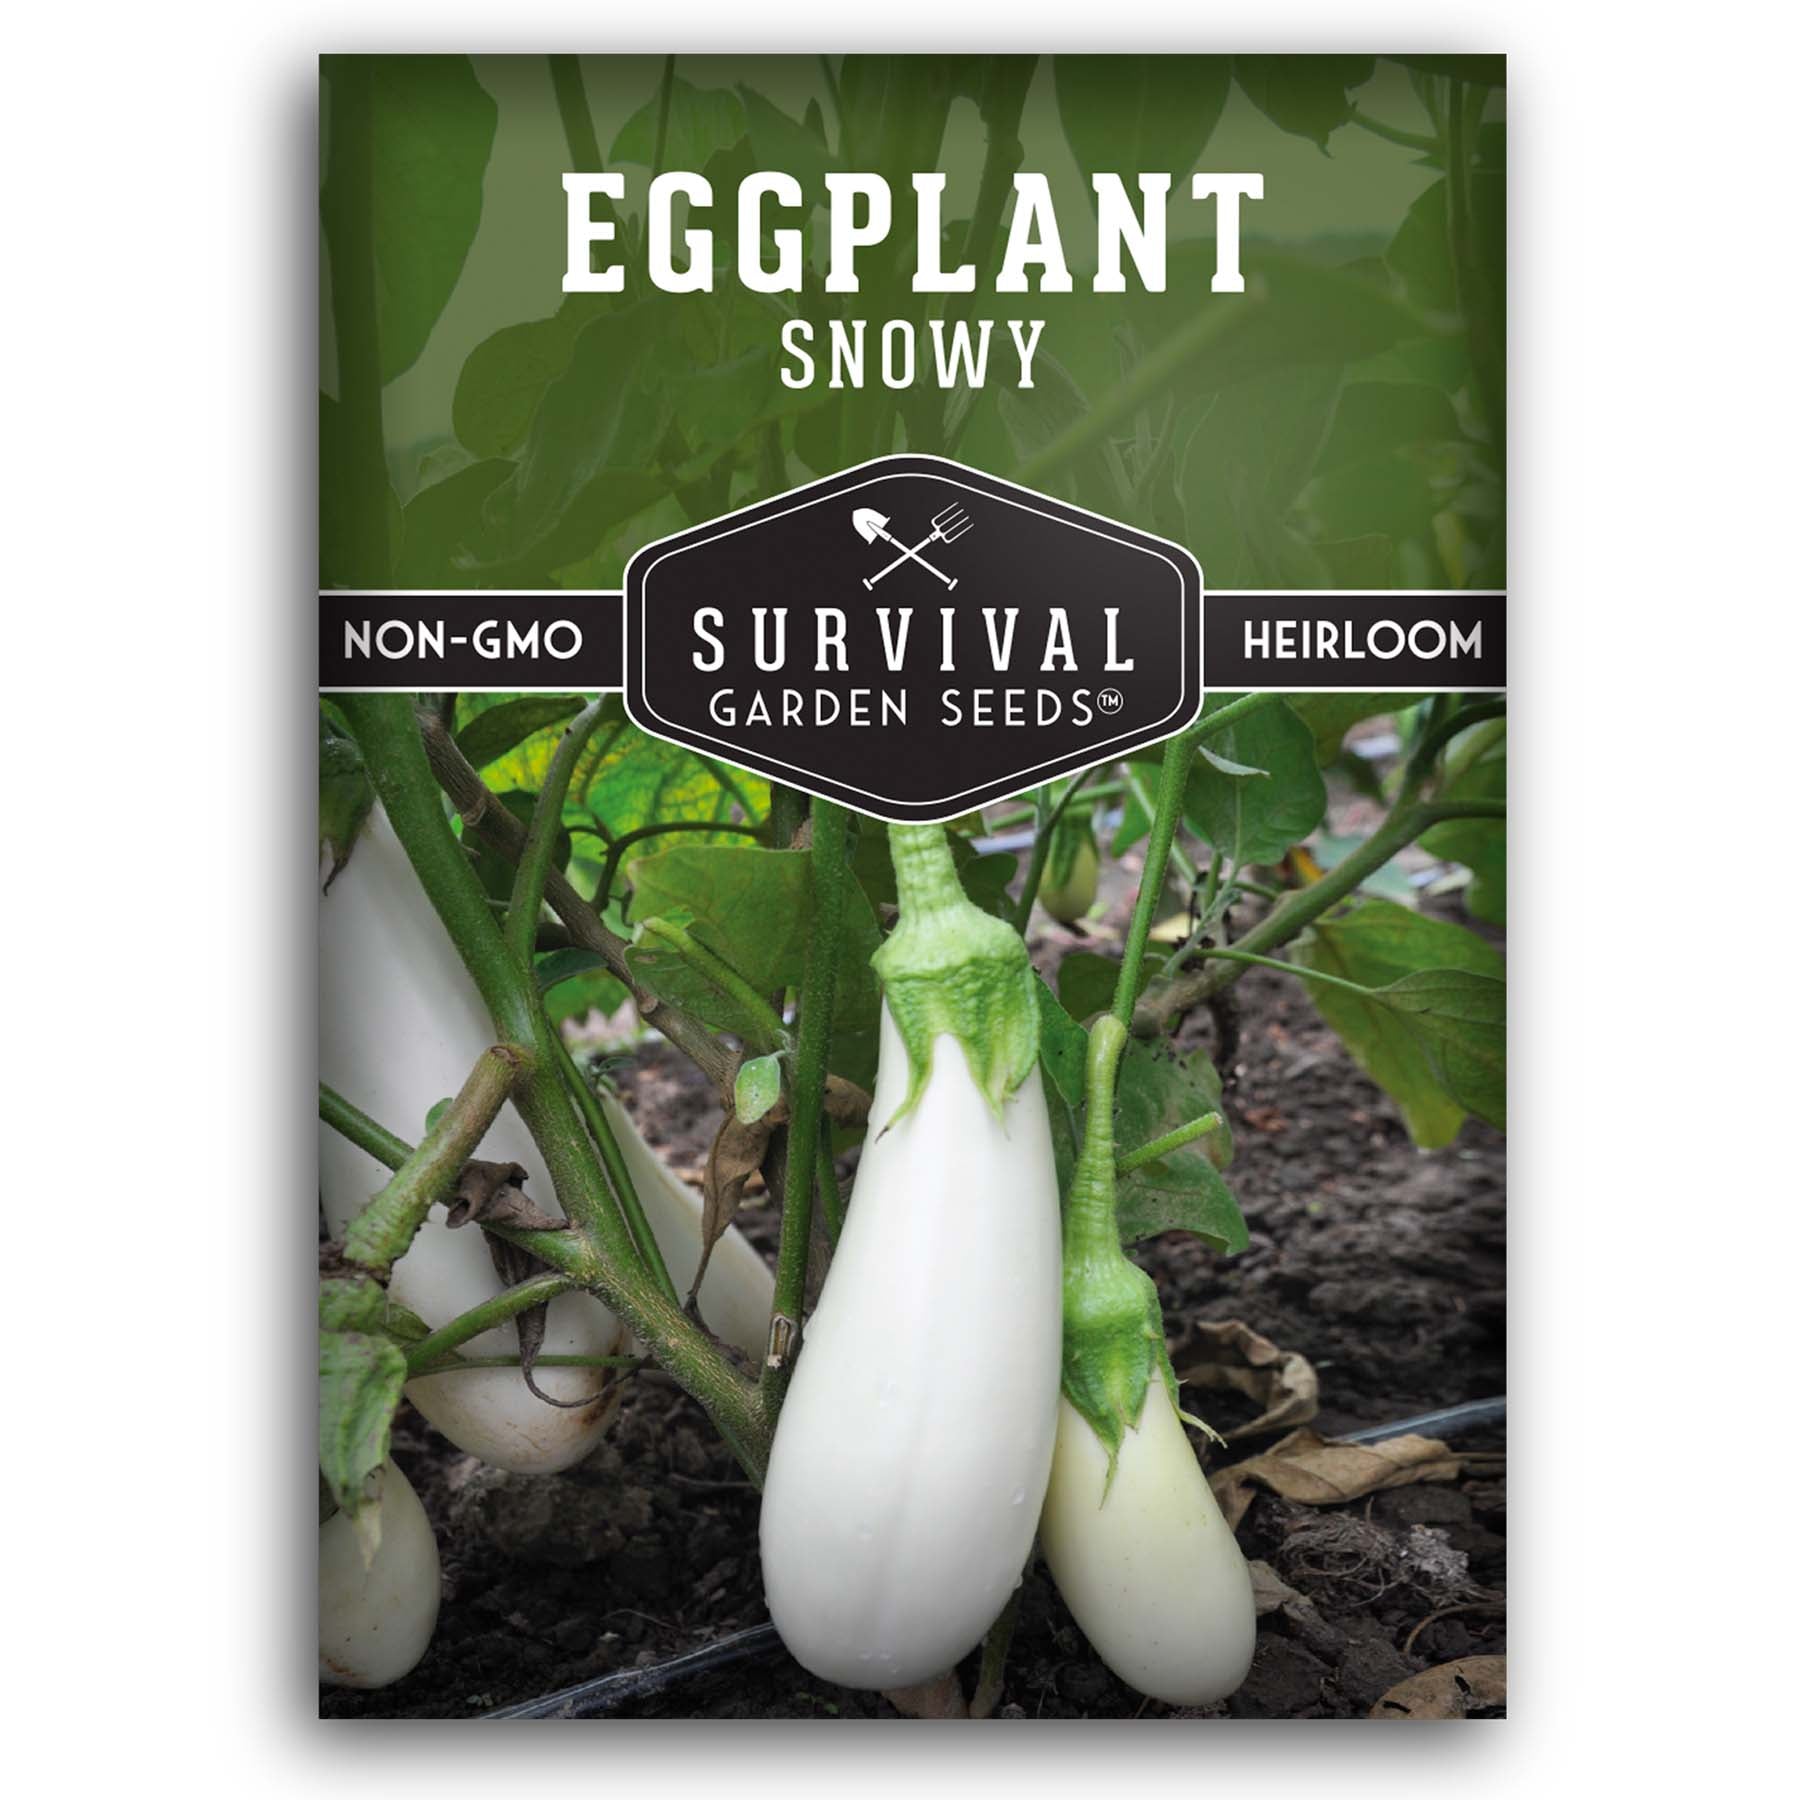 Snowy Eggplant seeds for planting